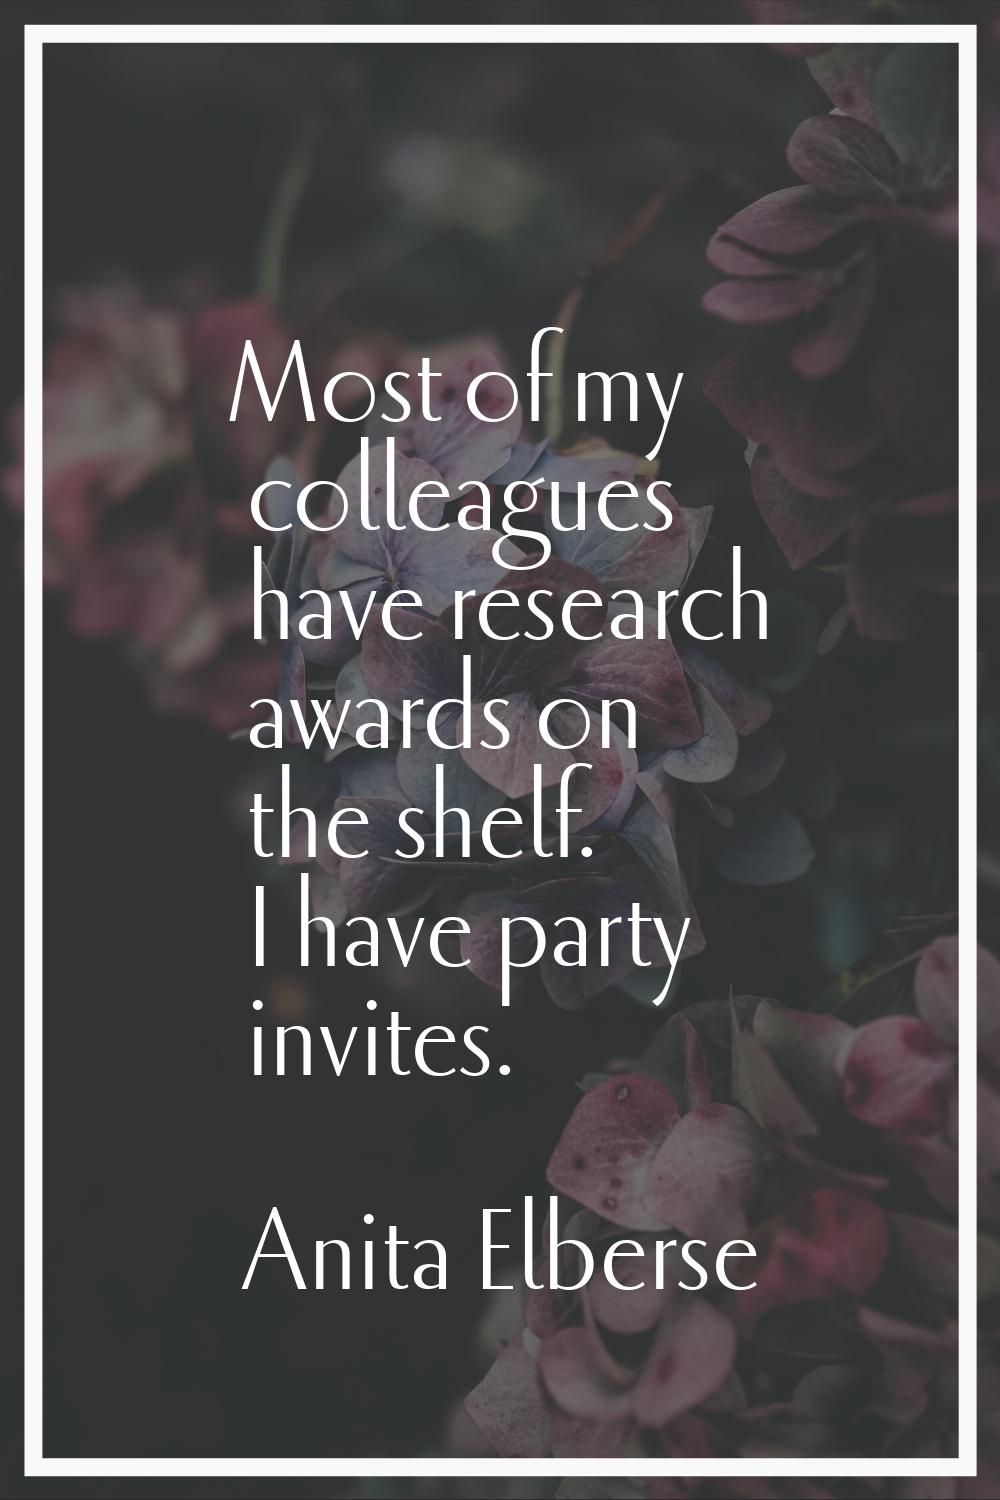 Most of my colleagues have research awards on the shelf. I have party invites.